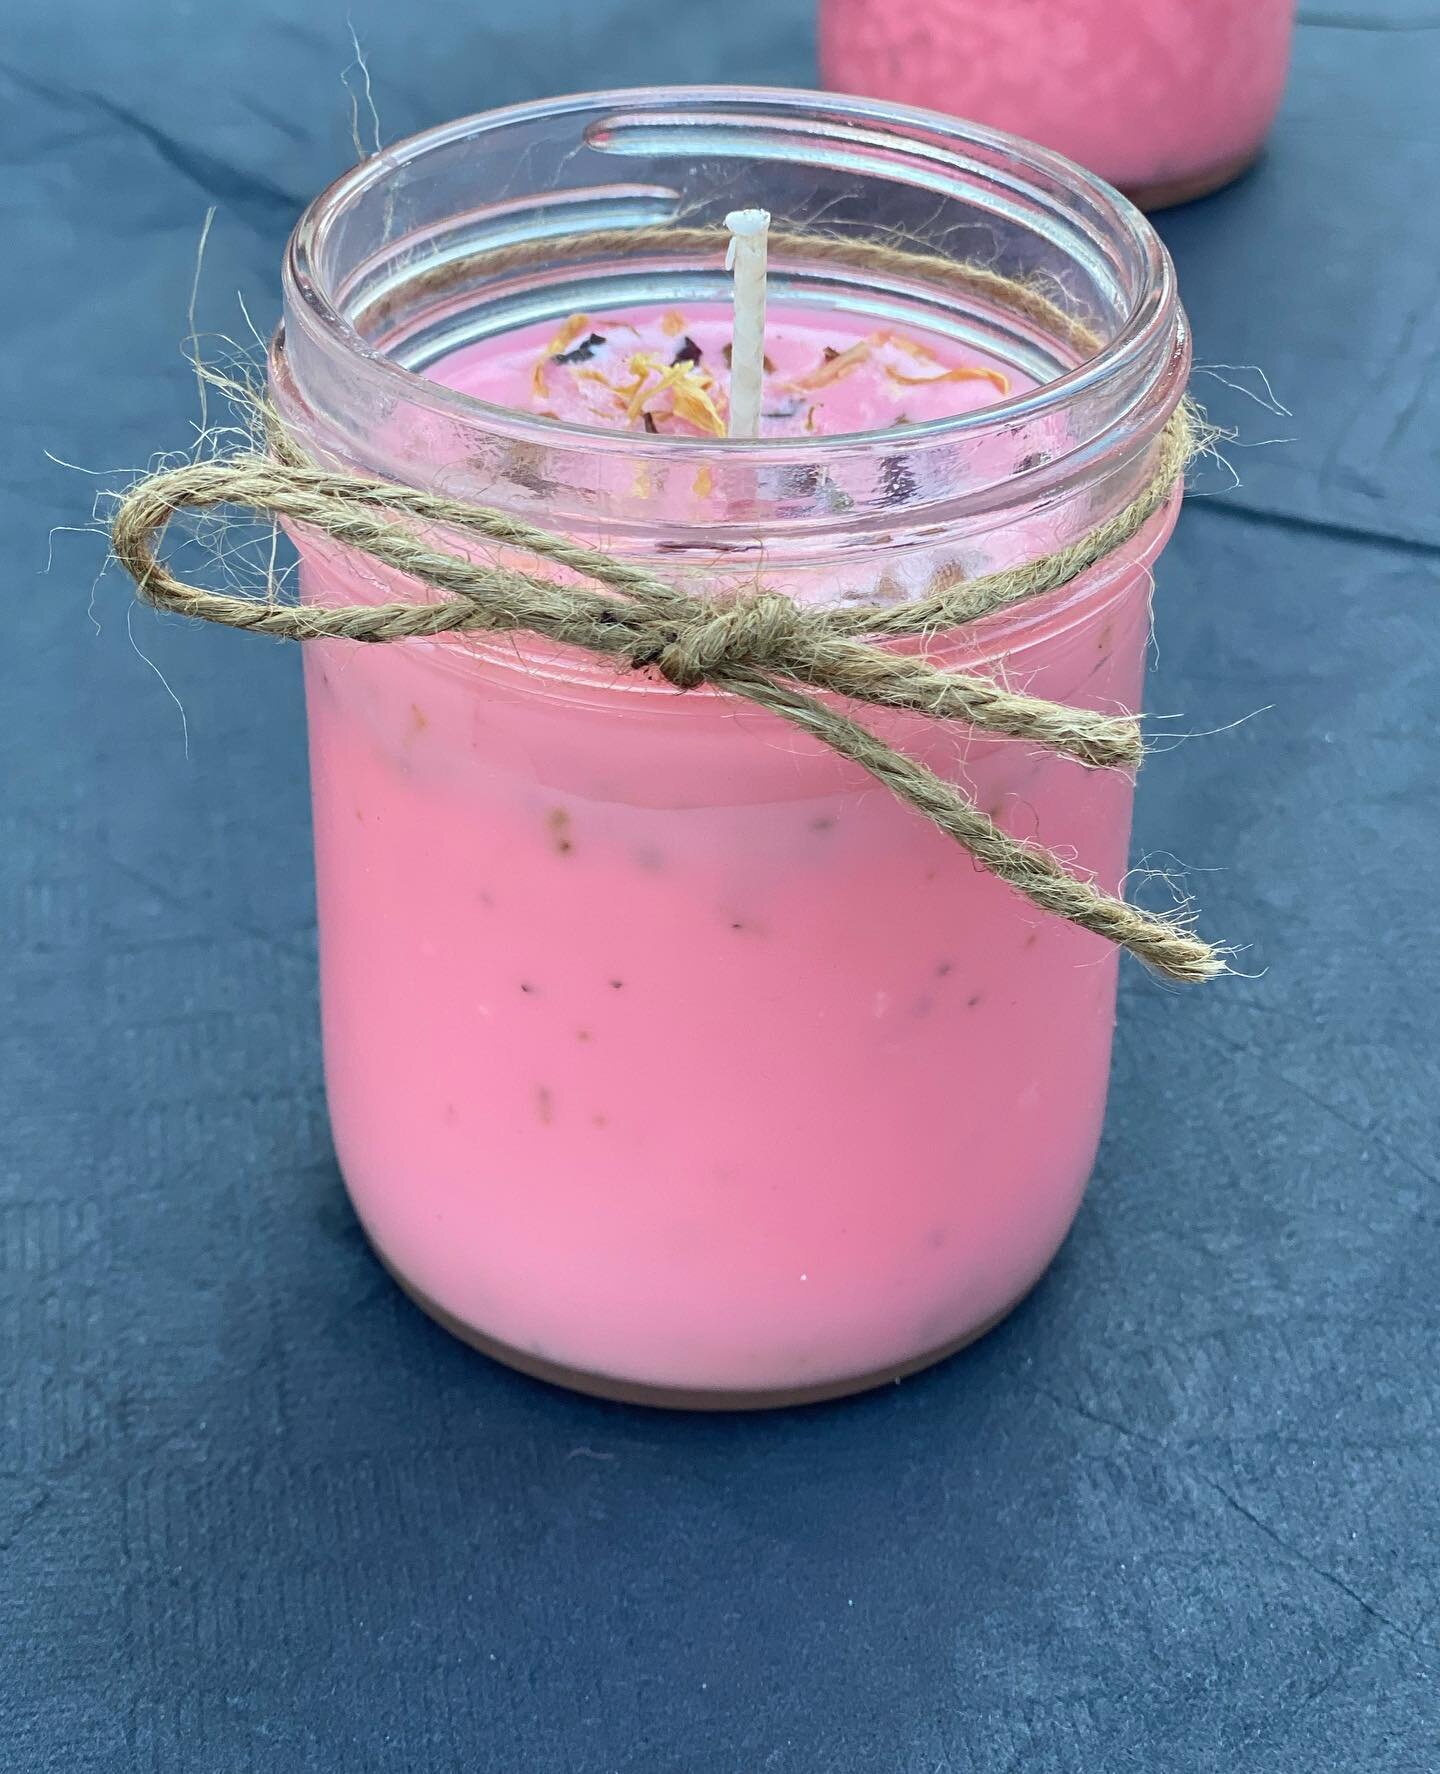 What about candles! Check out Vapothecary on Depop at vslittleshop!

https://www.depop.com/vslittleshop/selling/